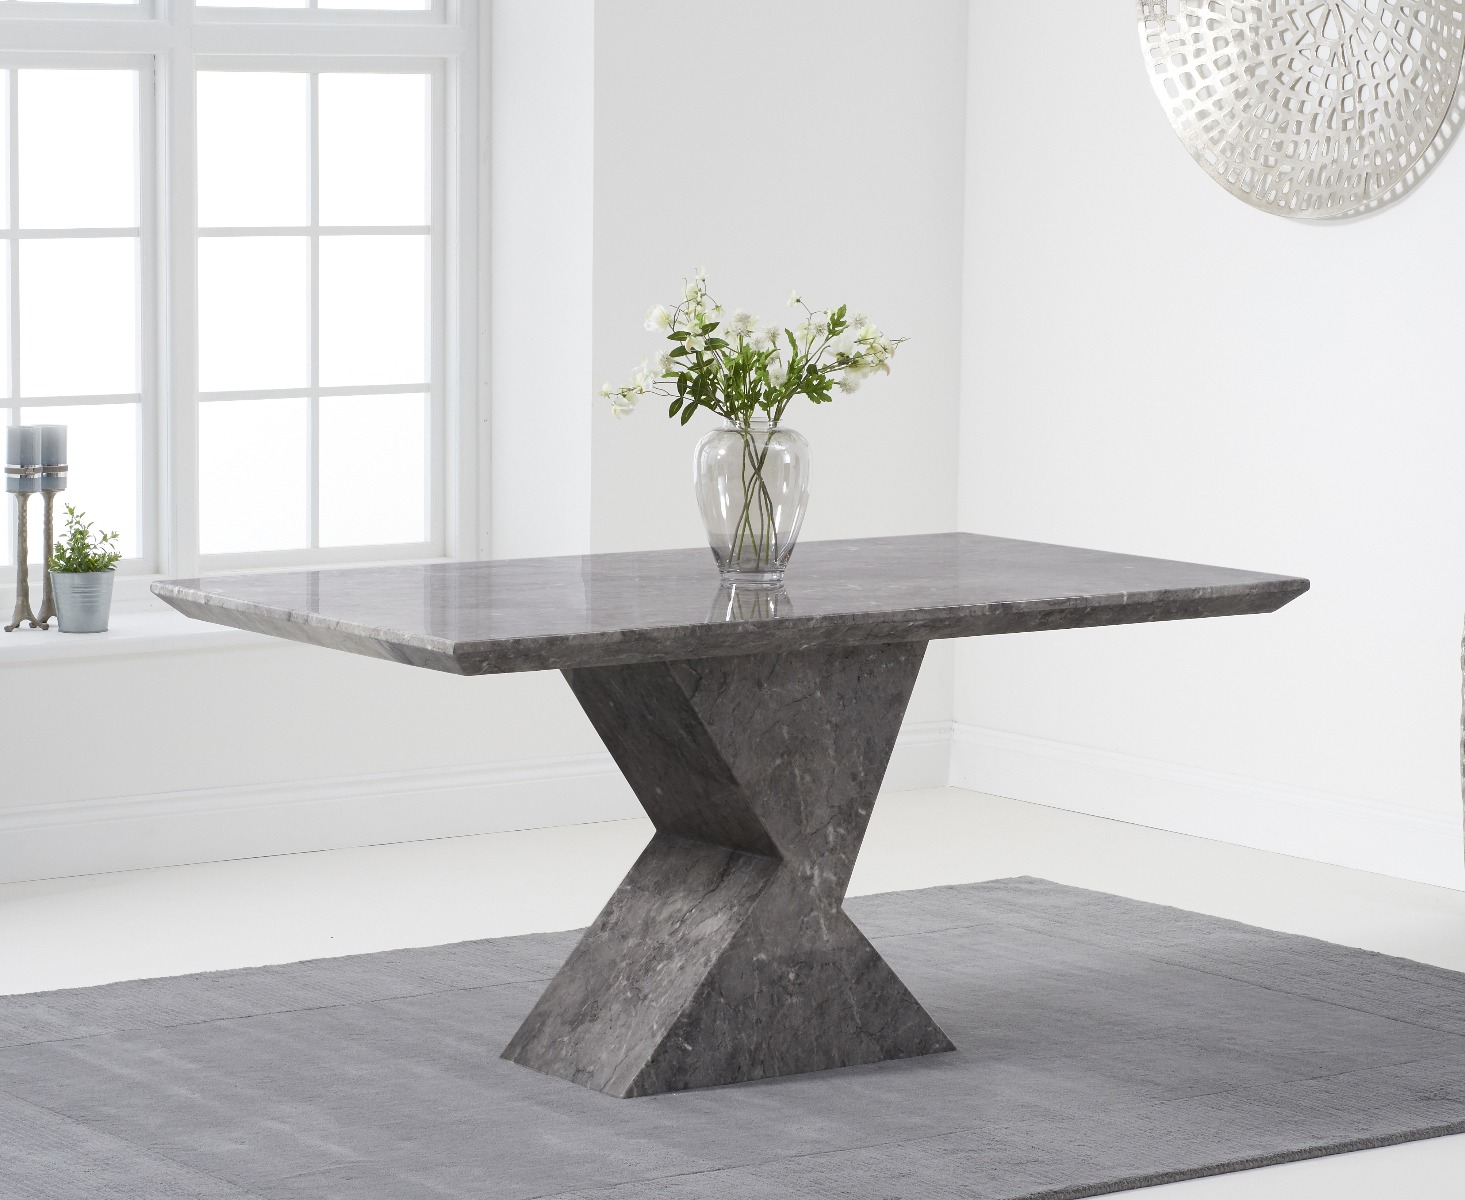 Photo 3 of Aaron 160cm grey marble dining table with 8 grey aldo chairs